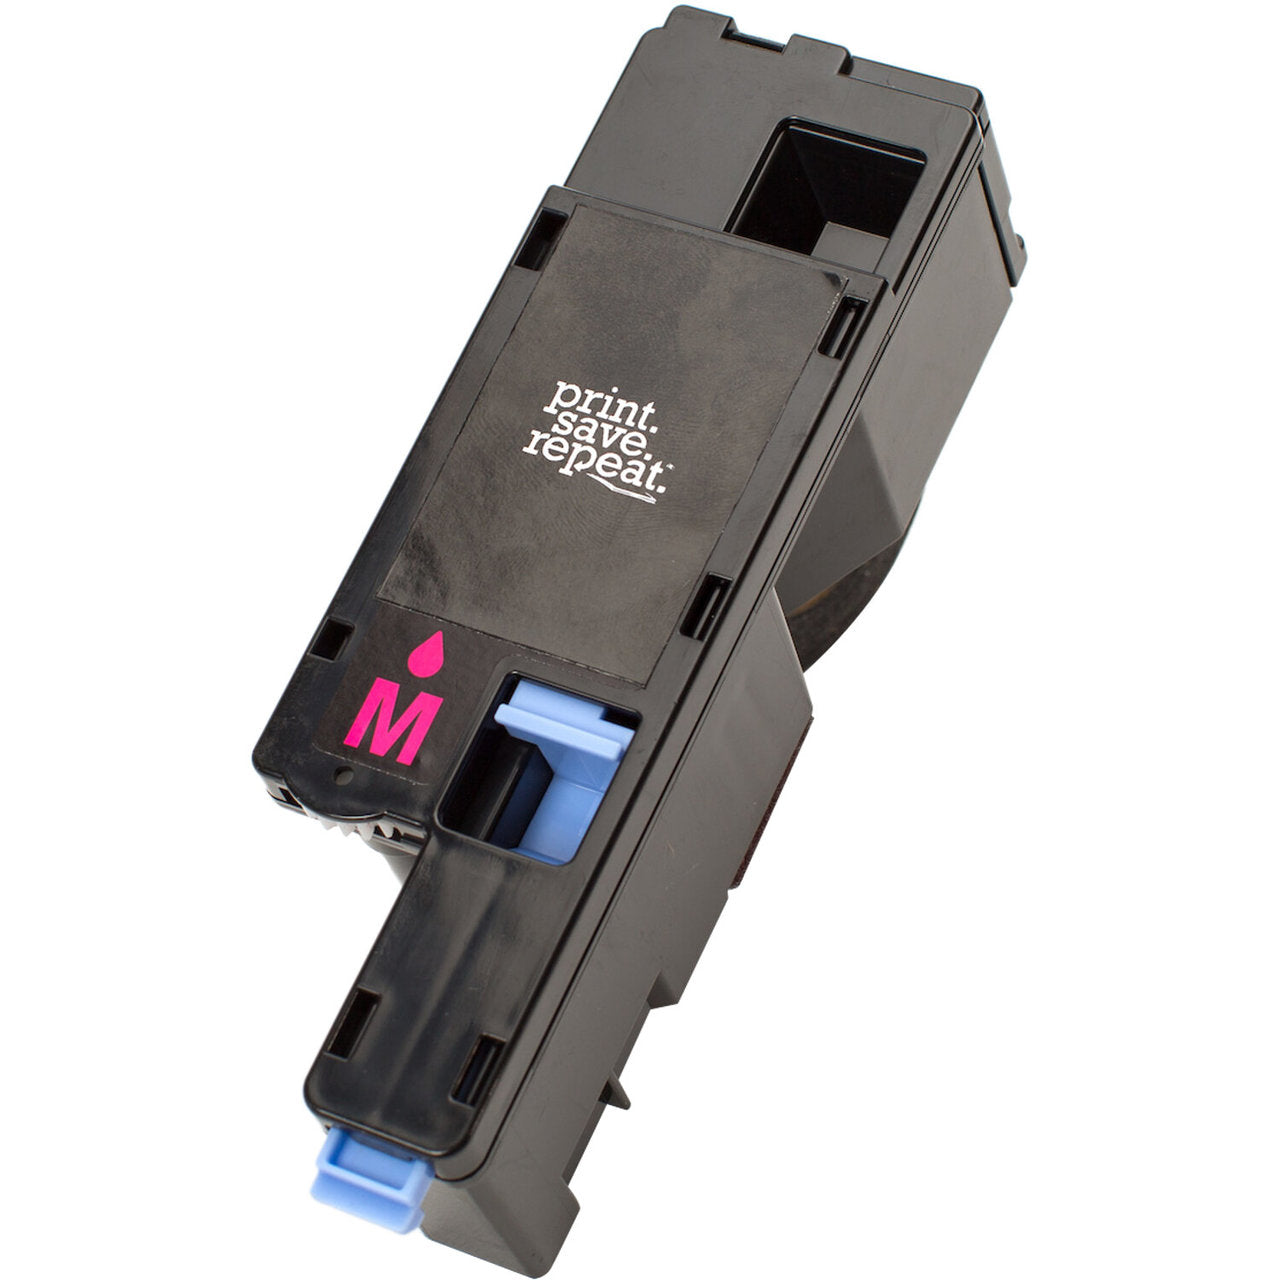 Print.Save.Repeat. Dell MHT79 Magenta Remanufactured Toner Cartridge for 1250, 1350, 1355, C1760, C1765 [700 Pages]